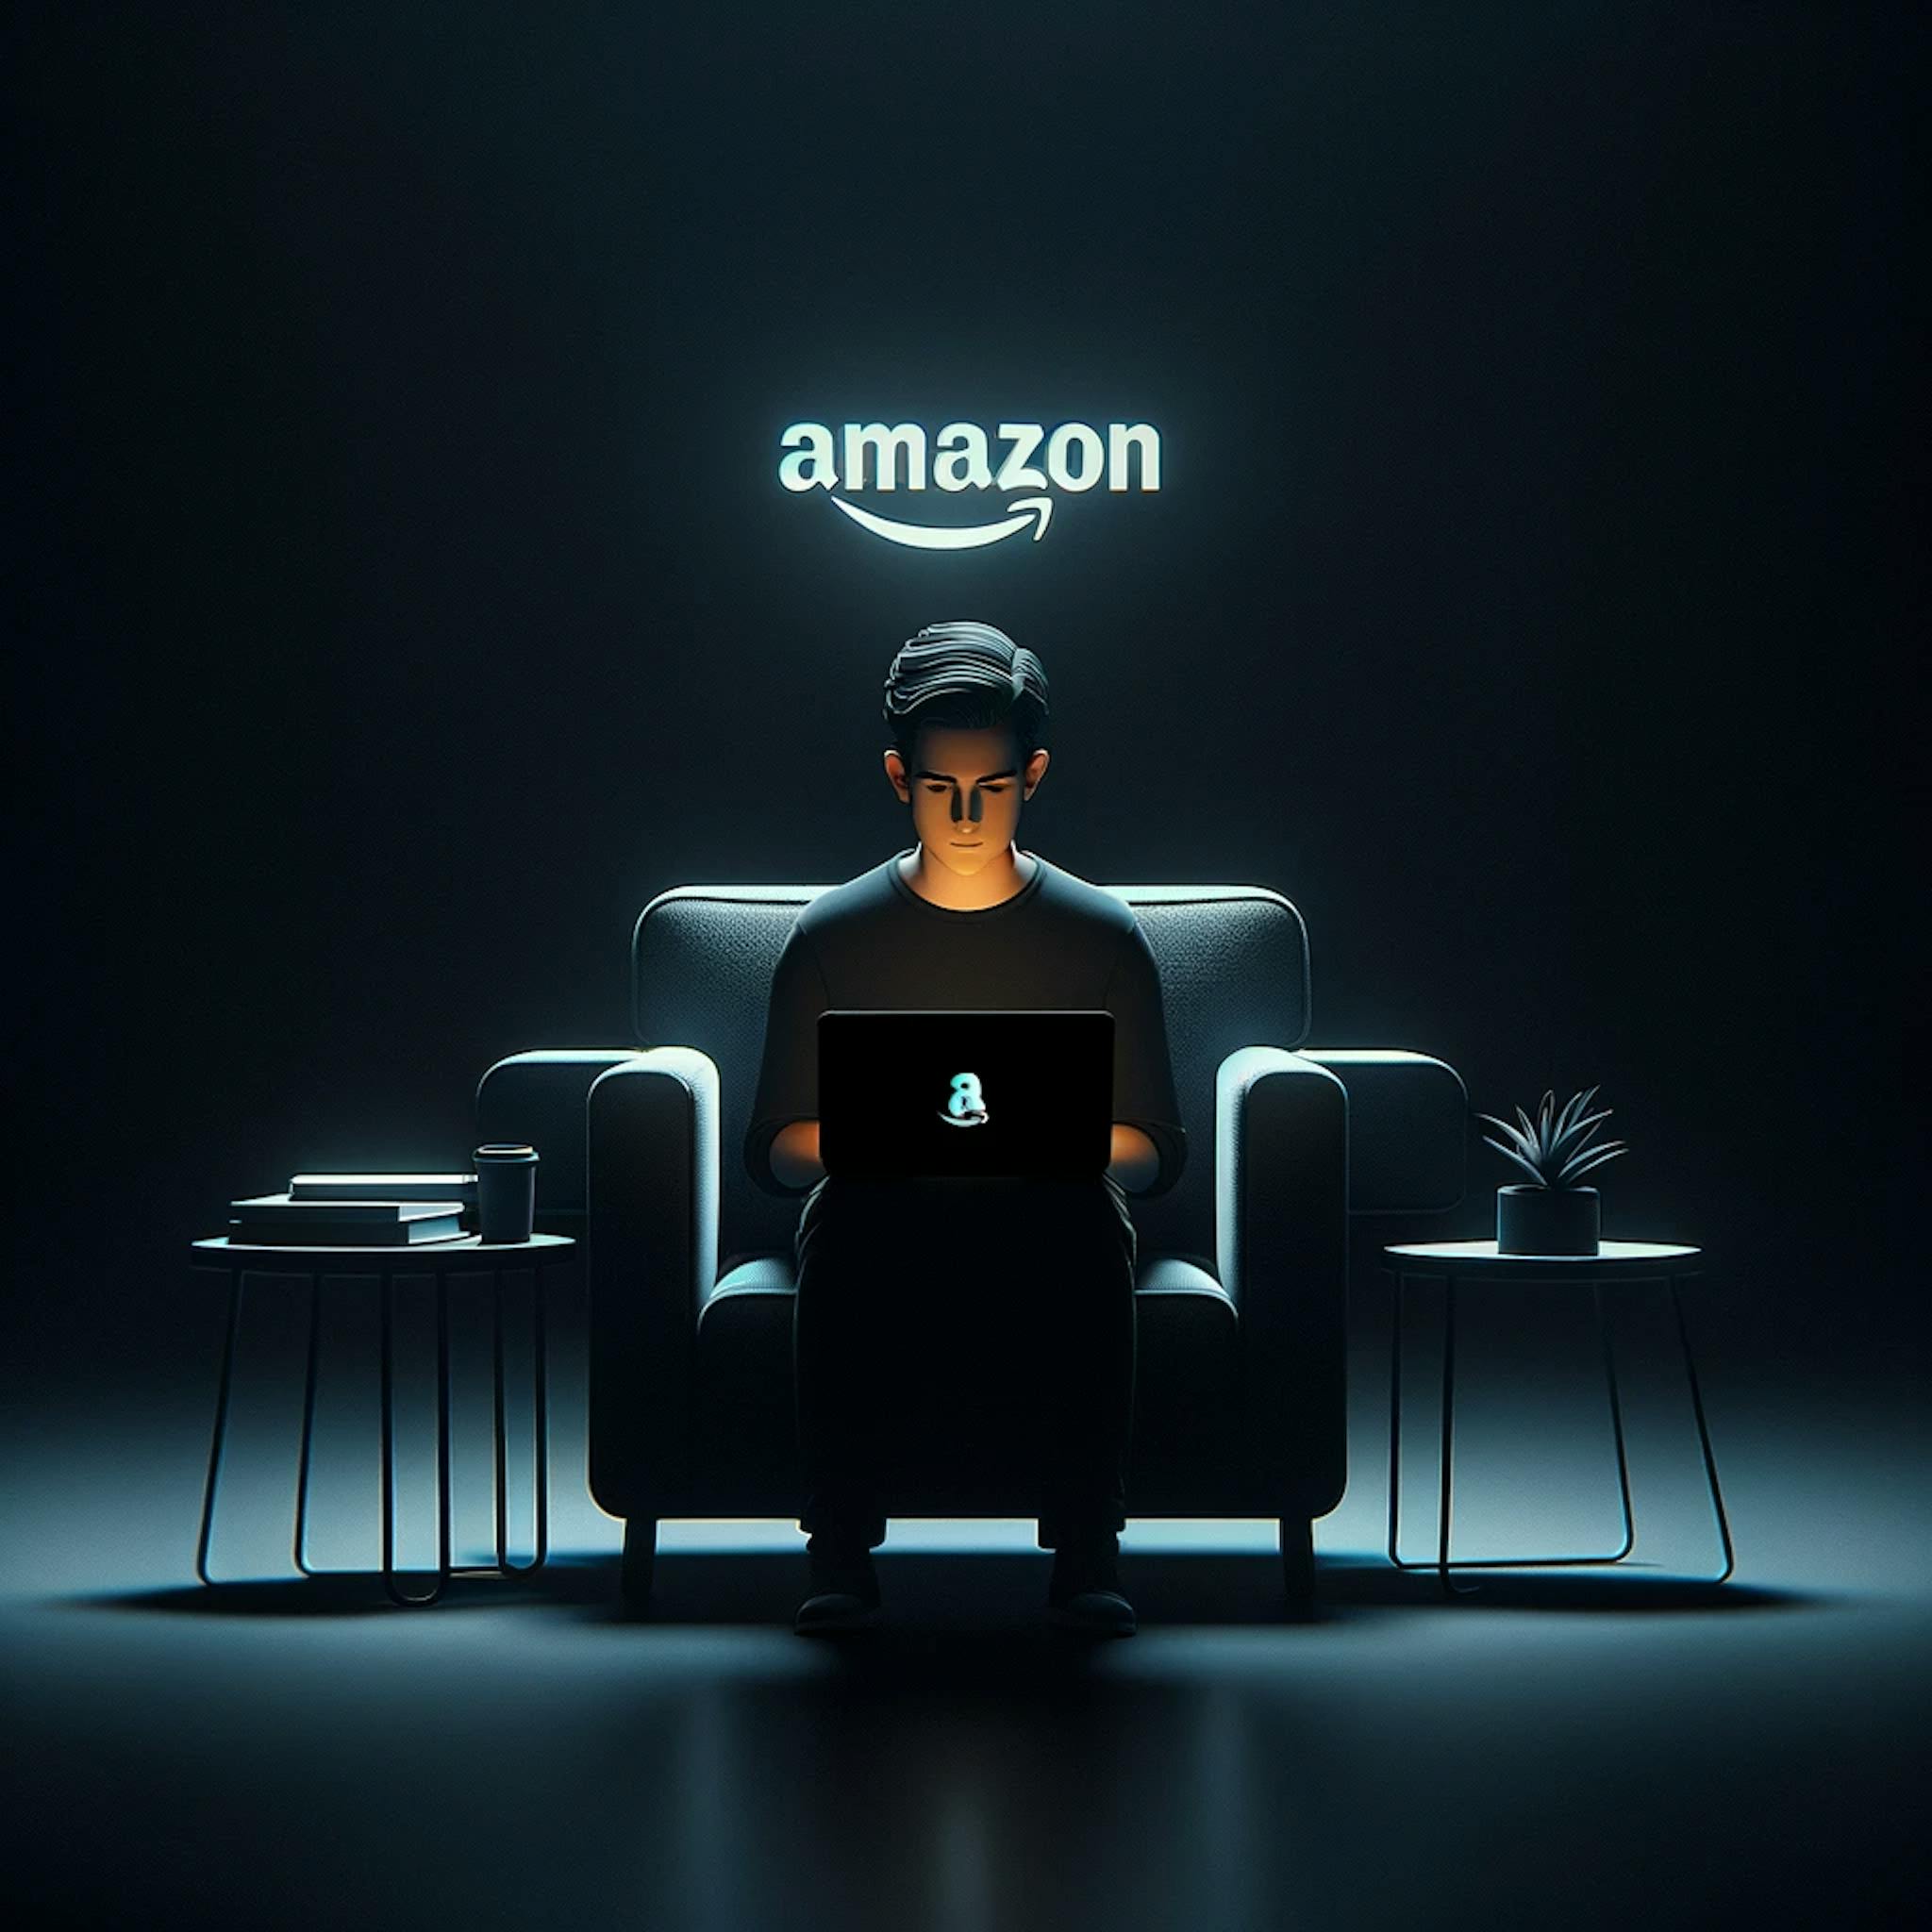 A man standing on a chair, and a laptop on his lap, amazon.com written on the wall behind him. 